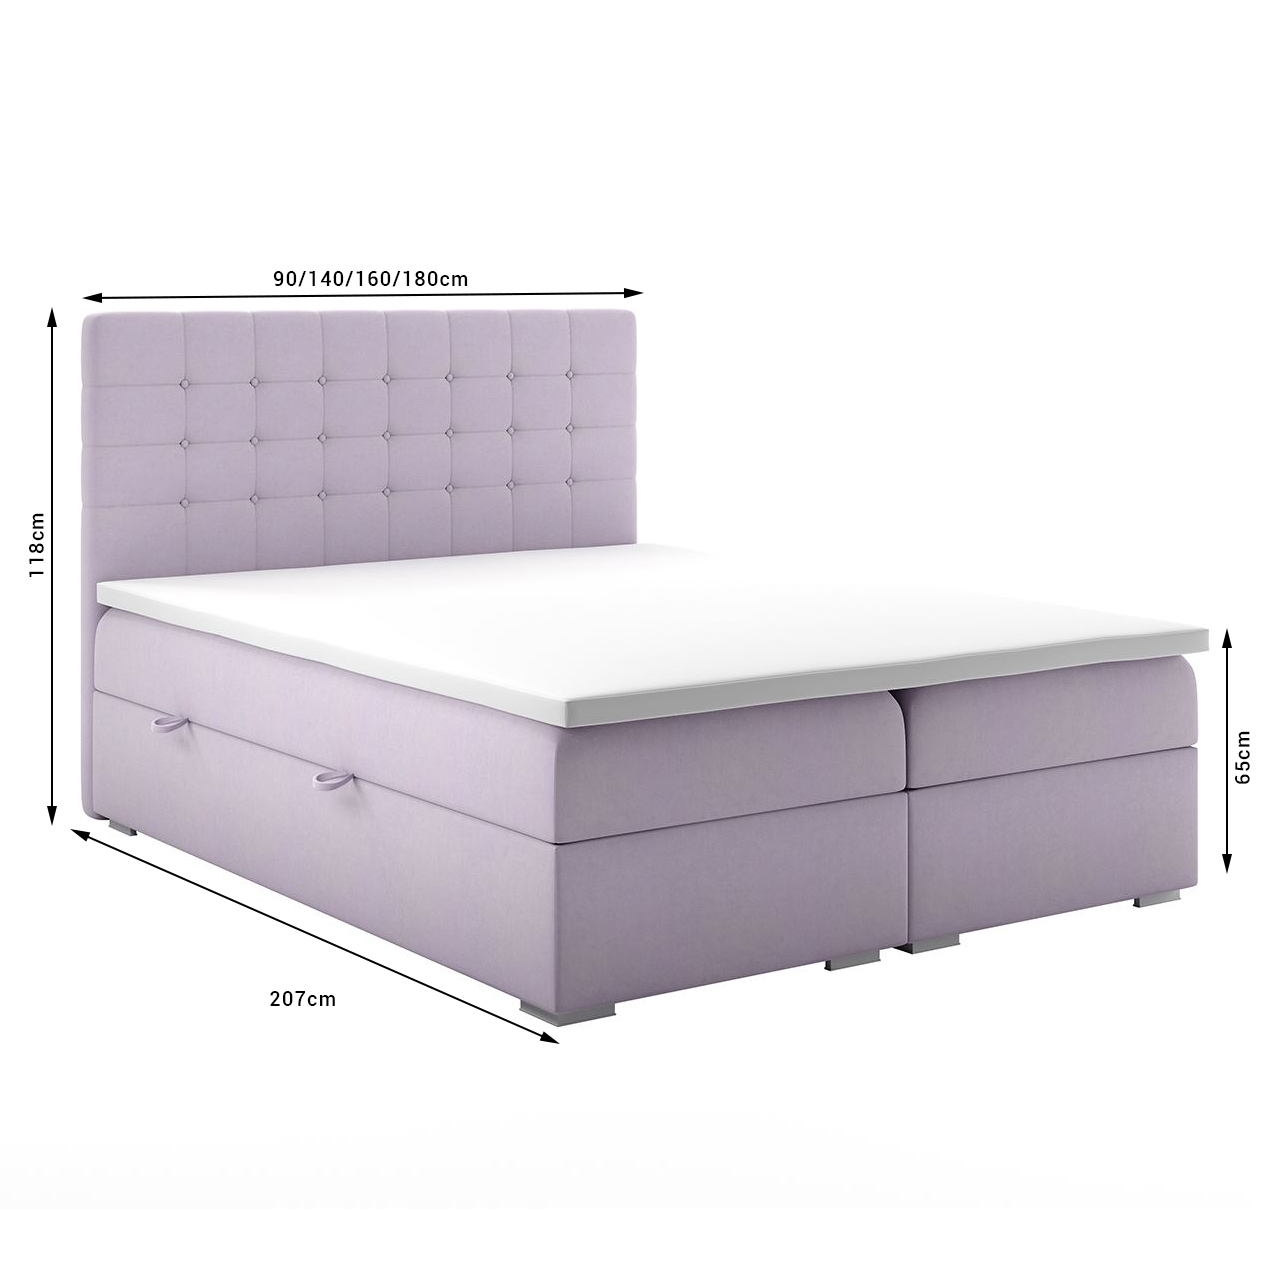 Upholstered bed CLAUDIS 180x200 riviera 41